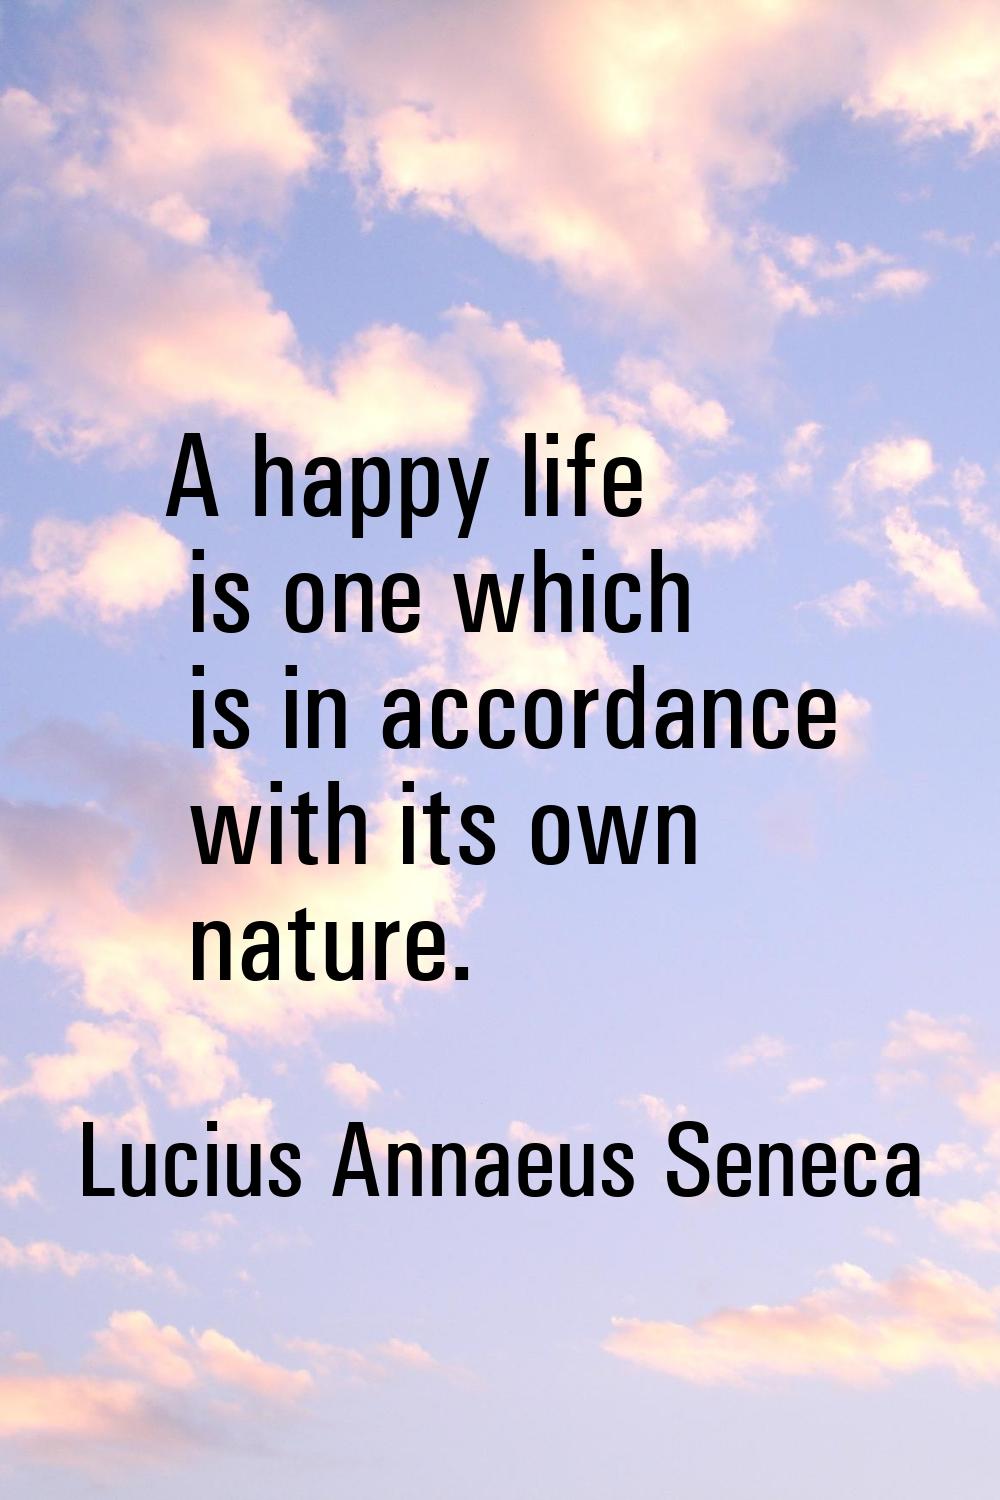 A happy life is one which is in accordance with its own nature.